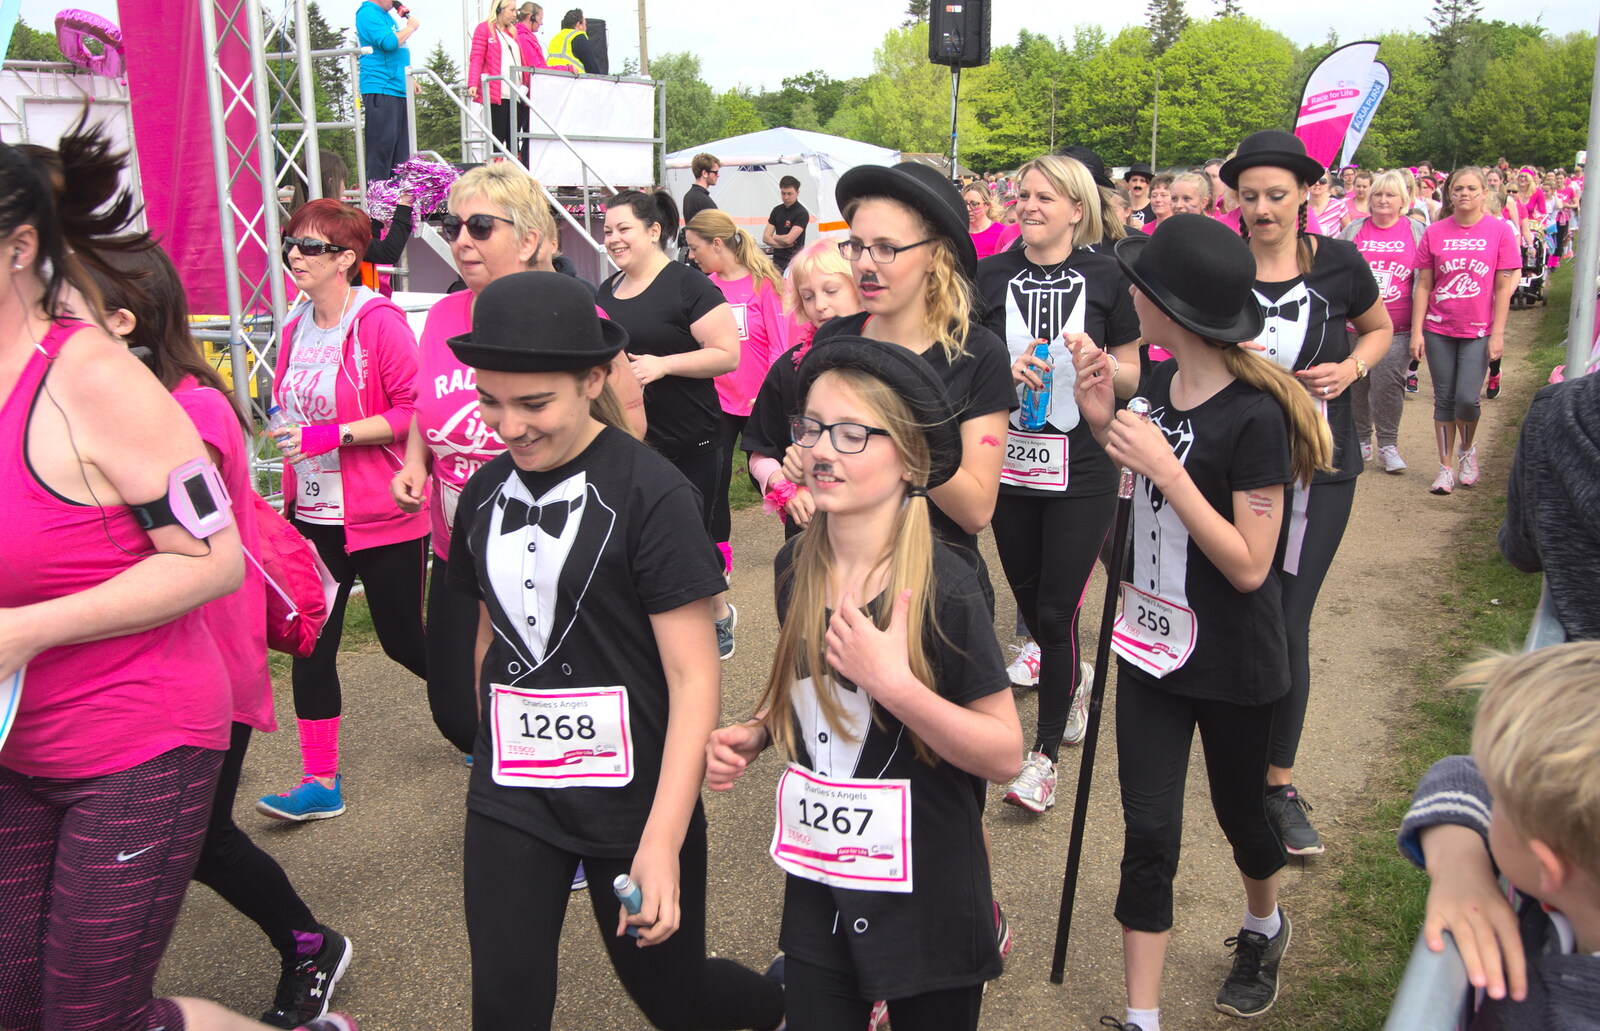 The fancy dress section from Isobel's Race for Life, Costessey, Norwich - 15th May 2016